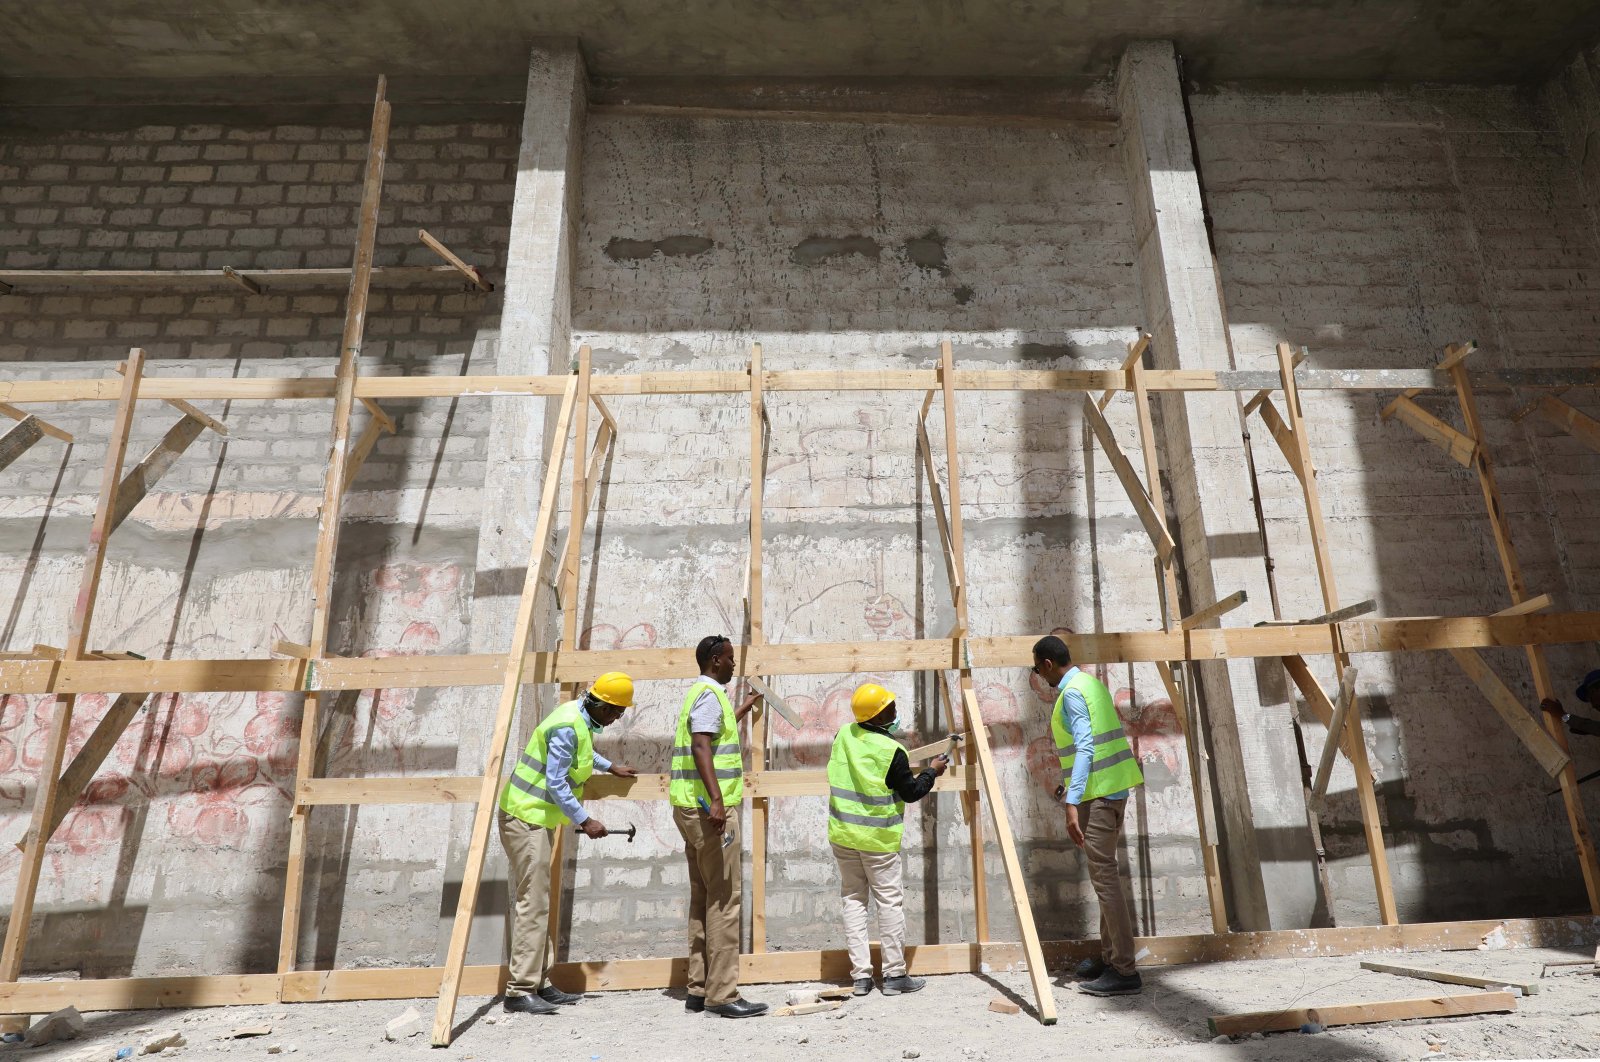 Construction workers take part in the renovation project of Somalia's National Theatre in Mogadishu, Somalia Feb. 3, 2019. (Reuters File Photo)